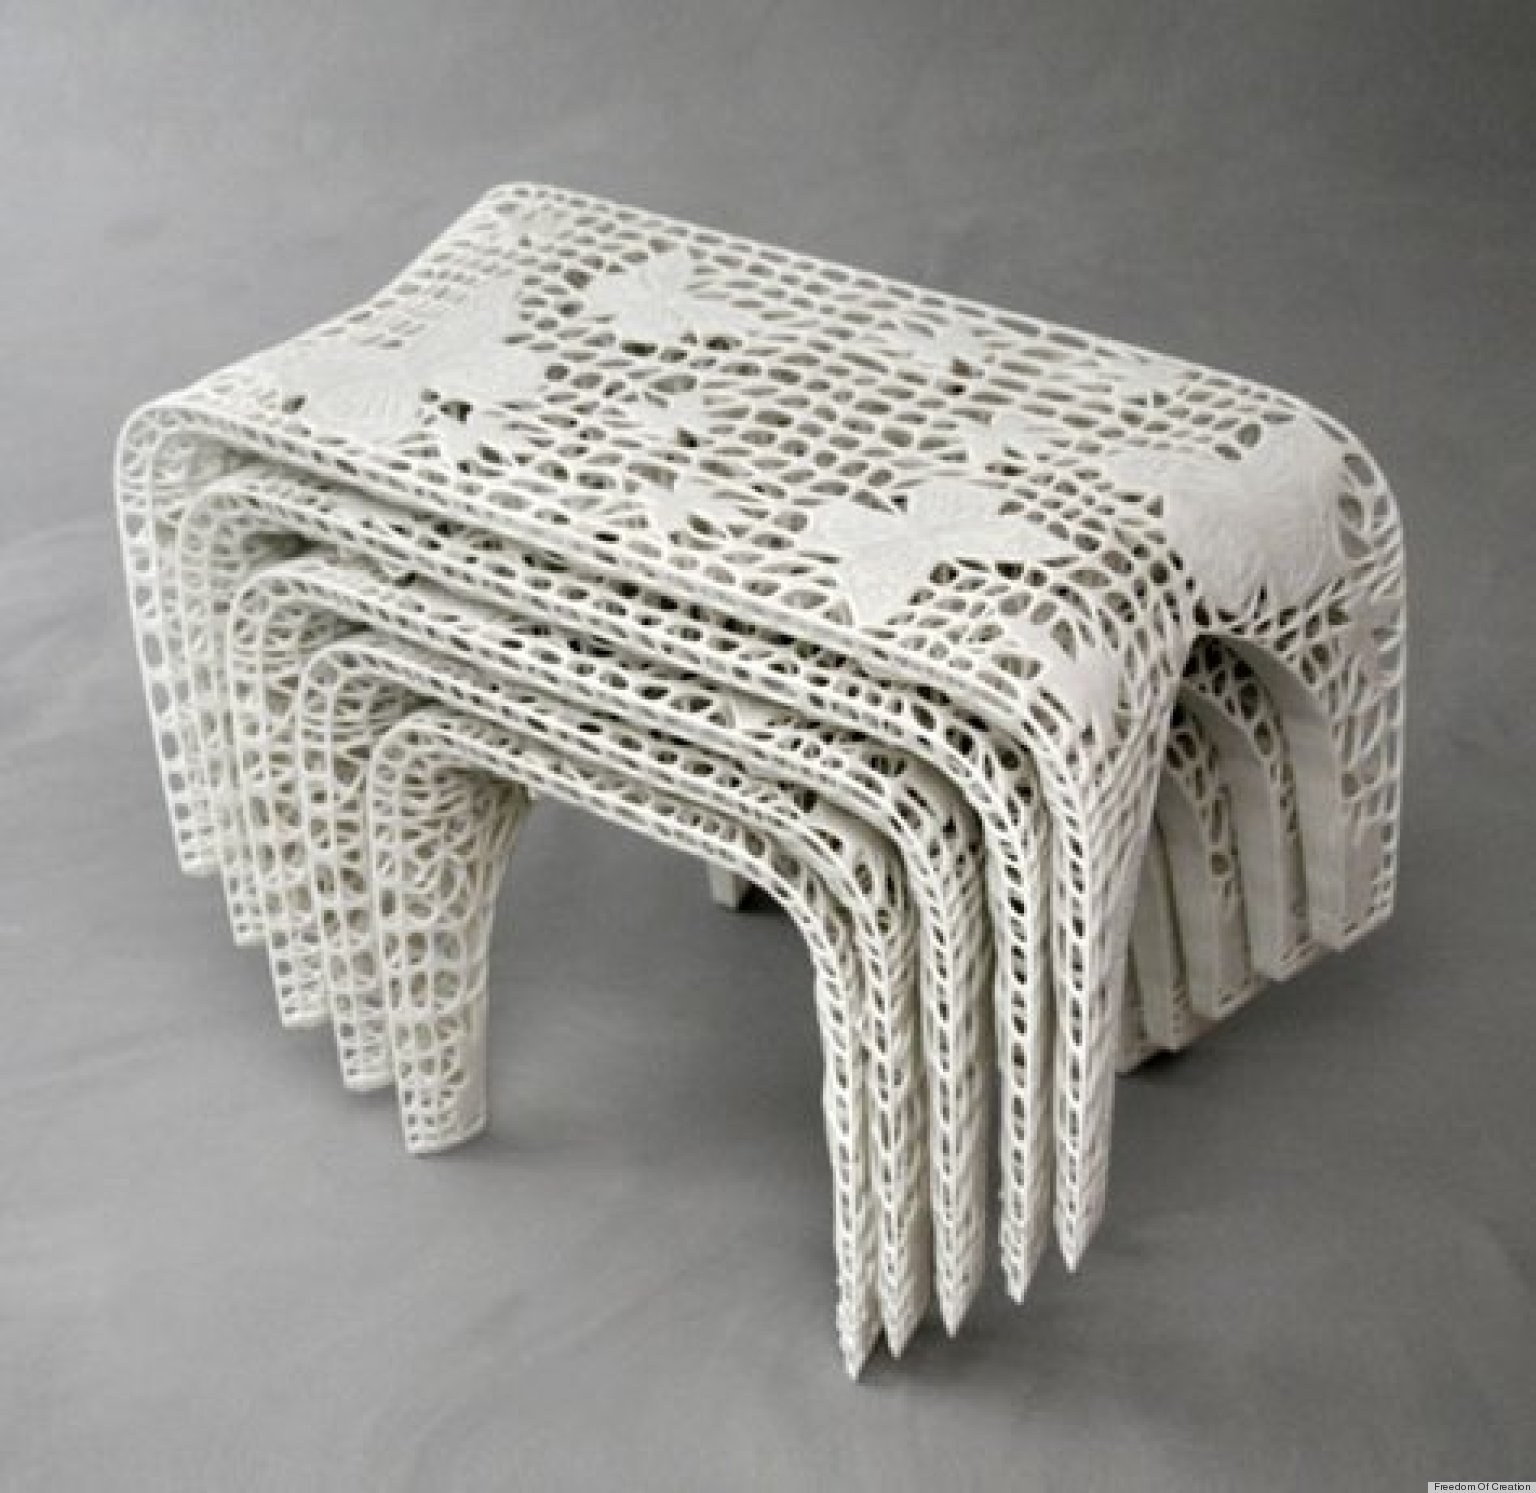 3D Printing: Cool Home Decor And Furniture Designs On The Market | HuffPost